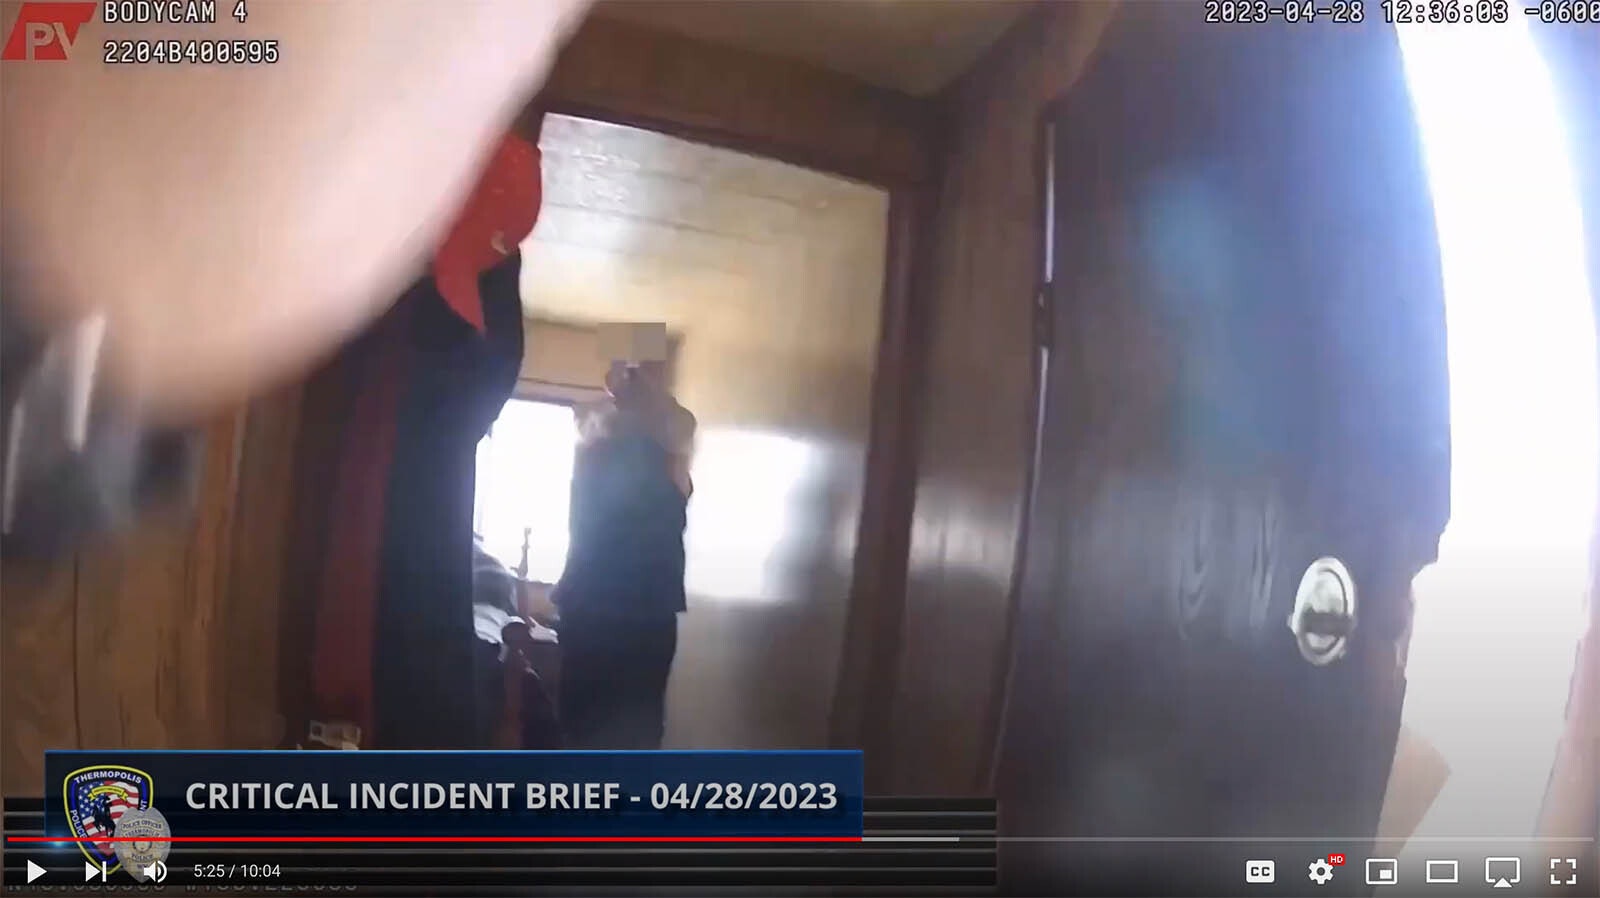 In this image from Thermopolis Police Sgt. Mike Mascorro's body cam on April 28, 2023, shows Mascorro being confronted by and armed Buck Laramore after breaking into Laramore's home intending to arrest him.